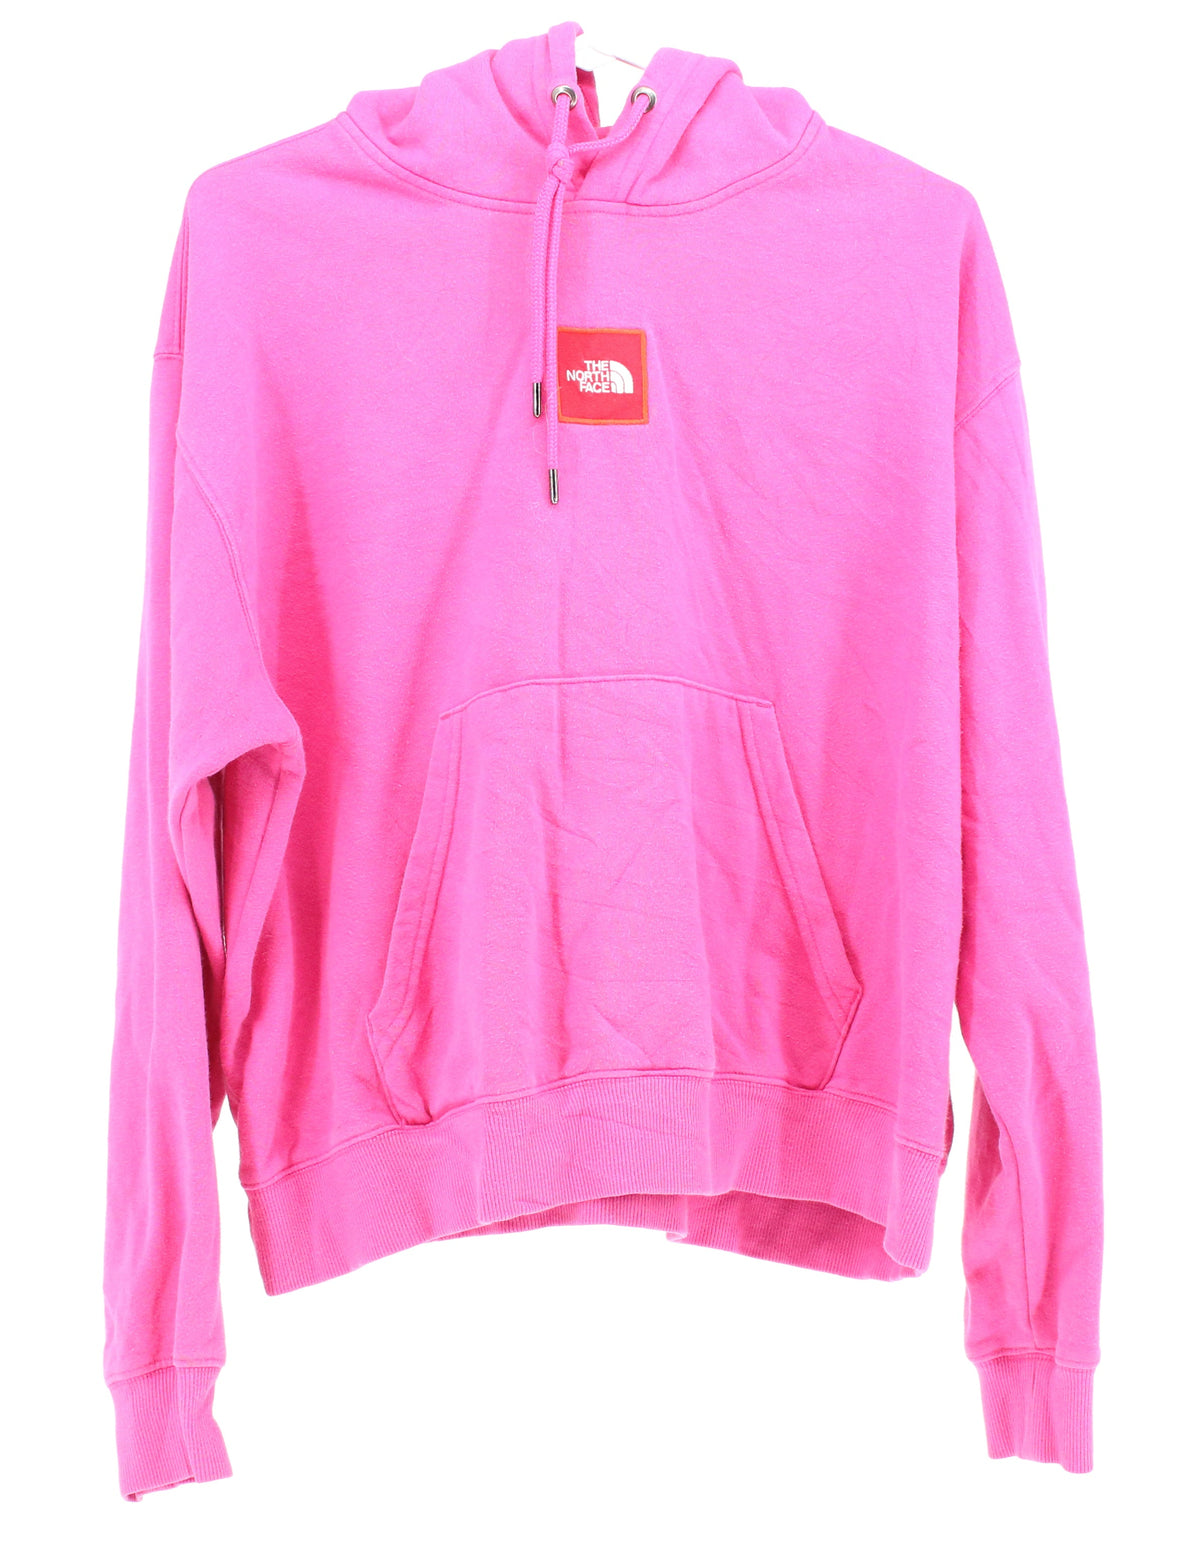 The North Face Pink Hooded Sweatshirt with center logo